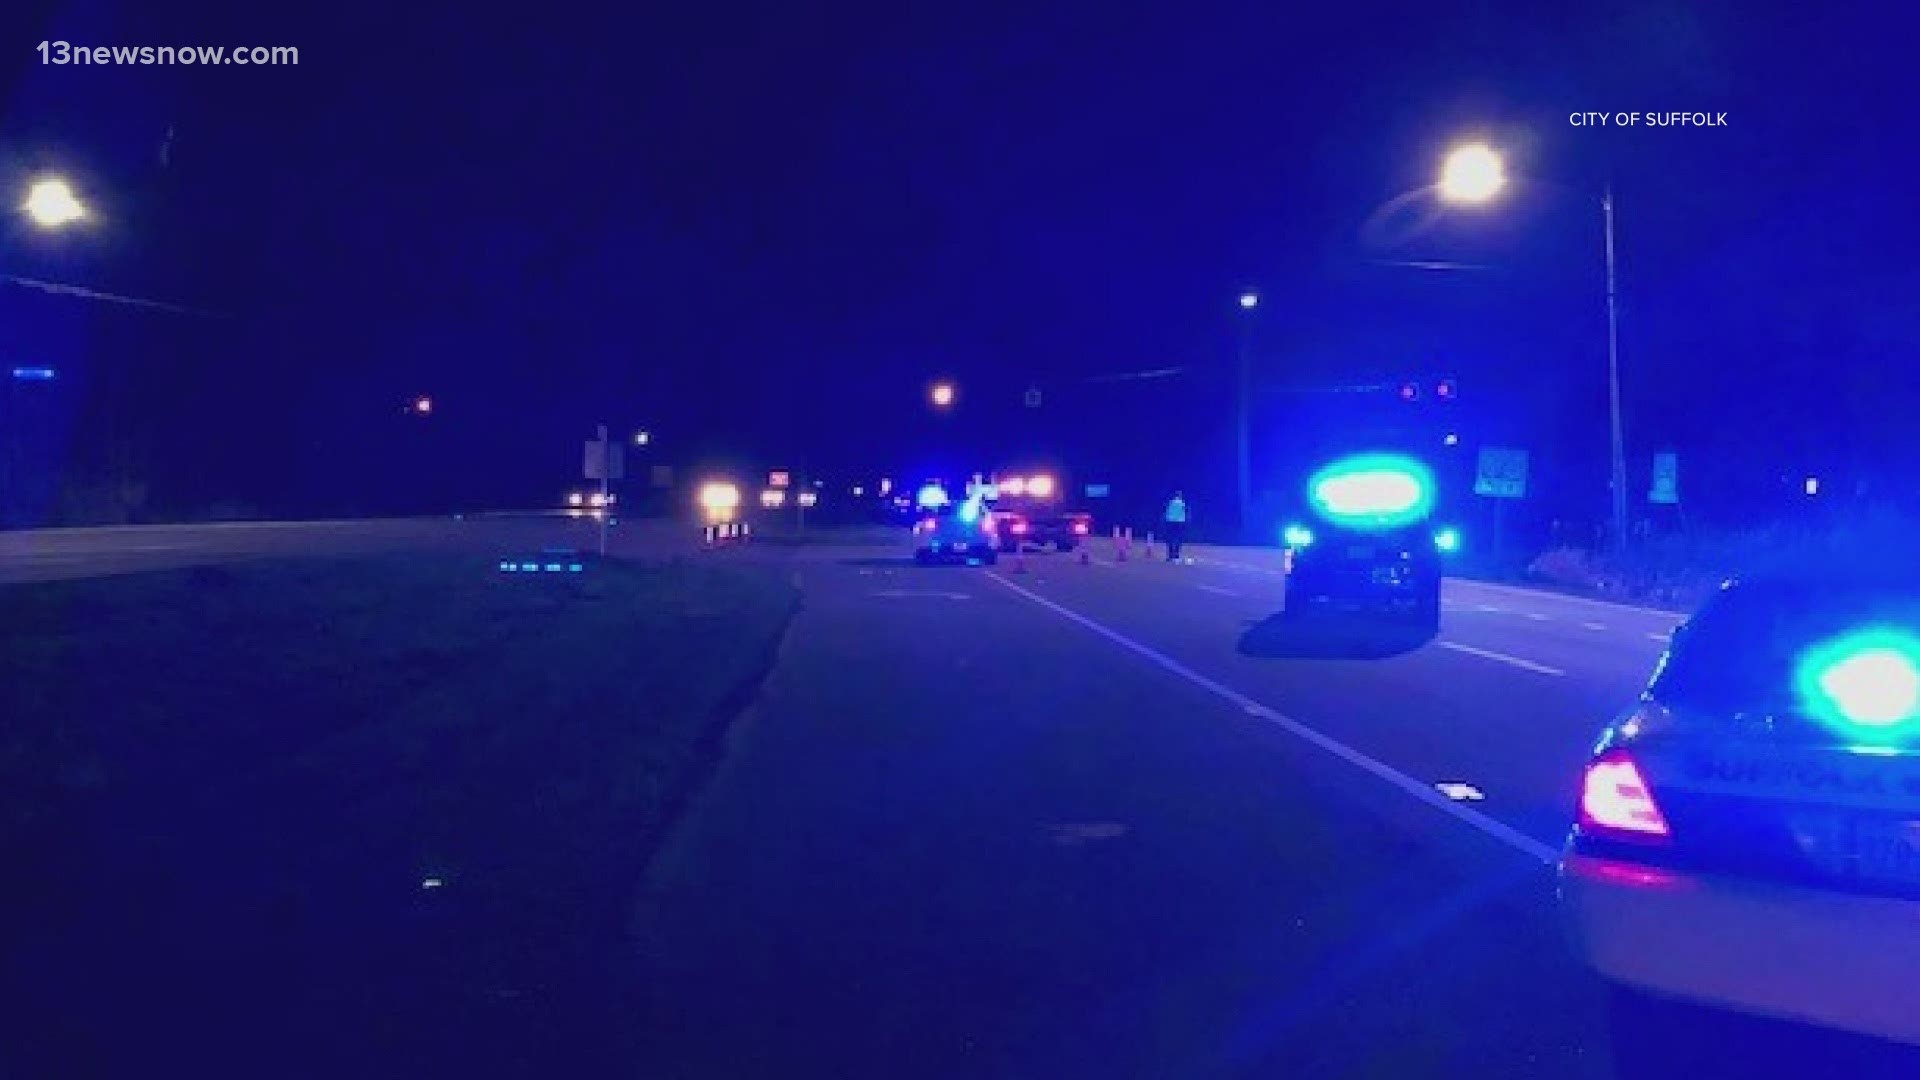 City of Suffolk officials said a motorcyclist had to be rushed to the hospital with serious injuries after a Friday night accident with an 18-wheeler.